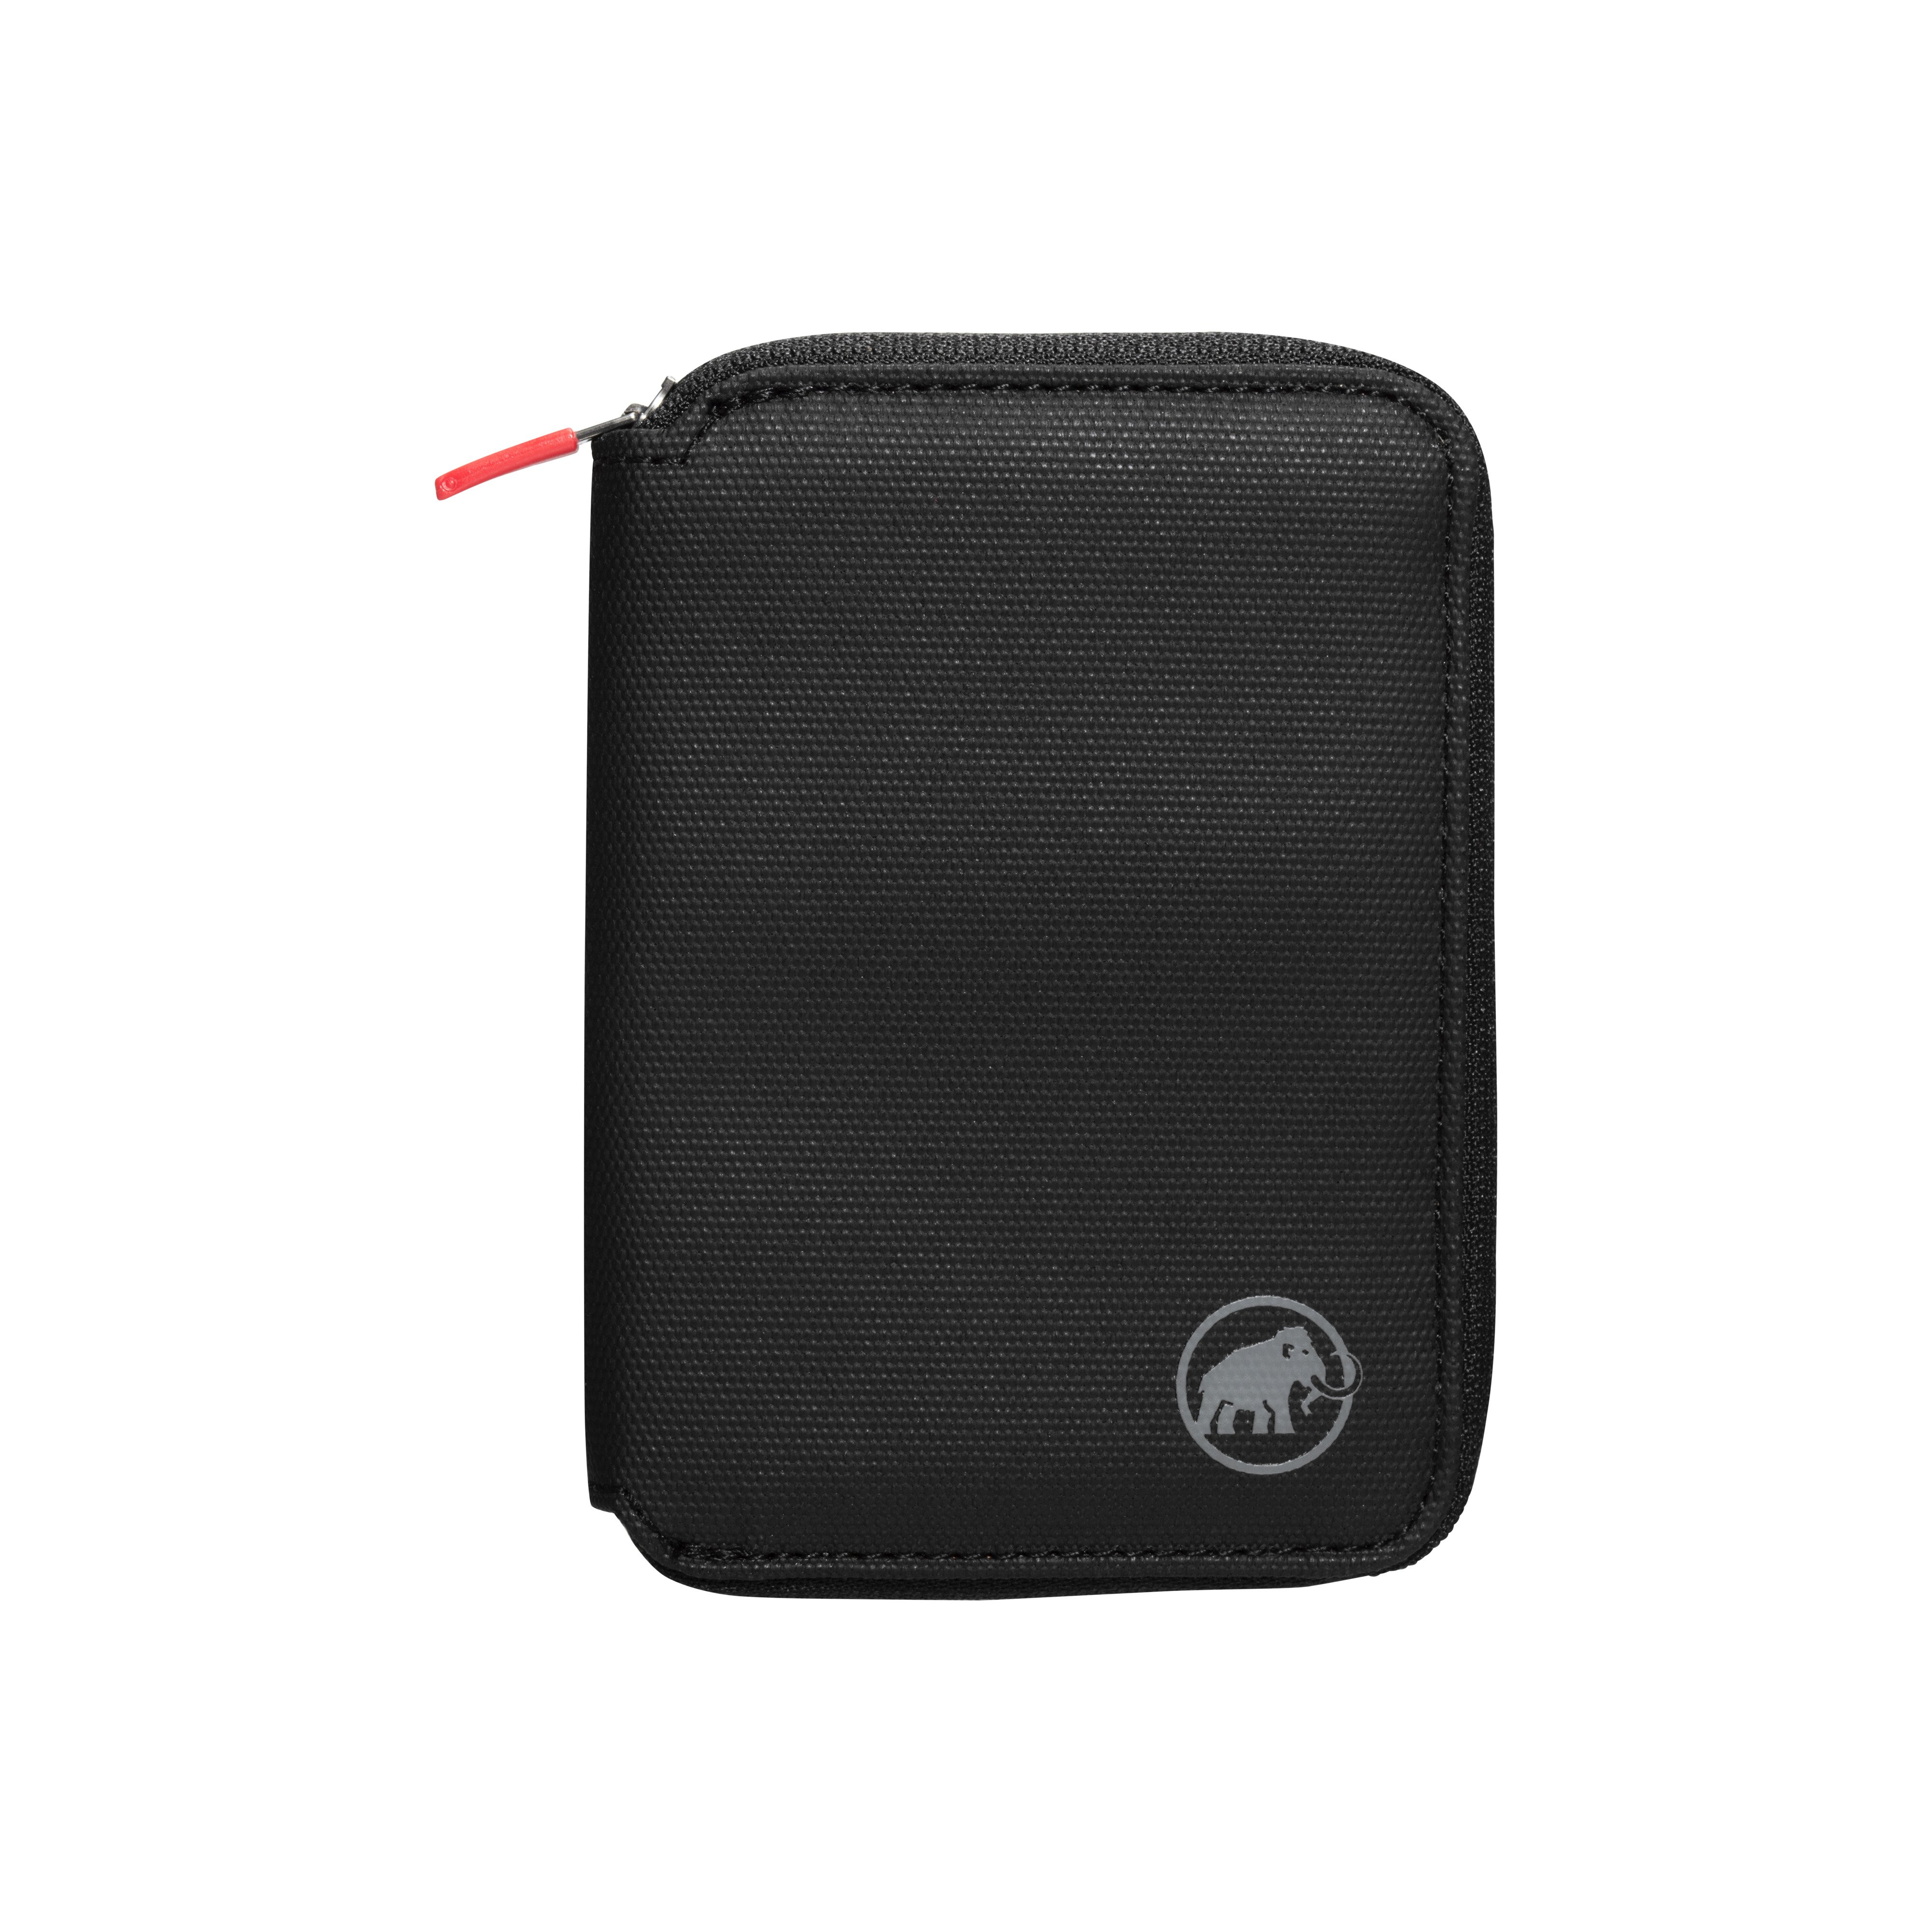 Zip Wallet - black, one size product image